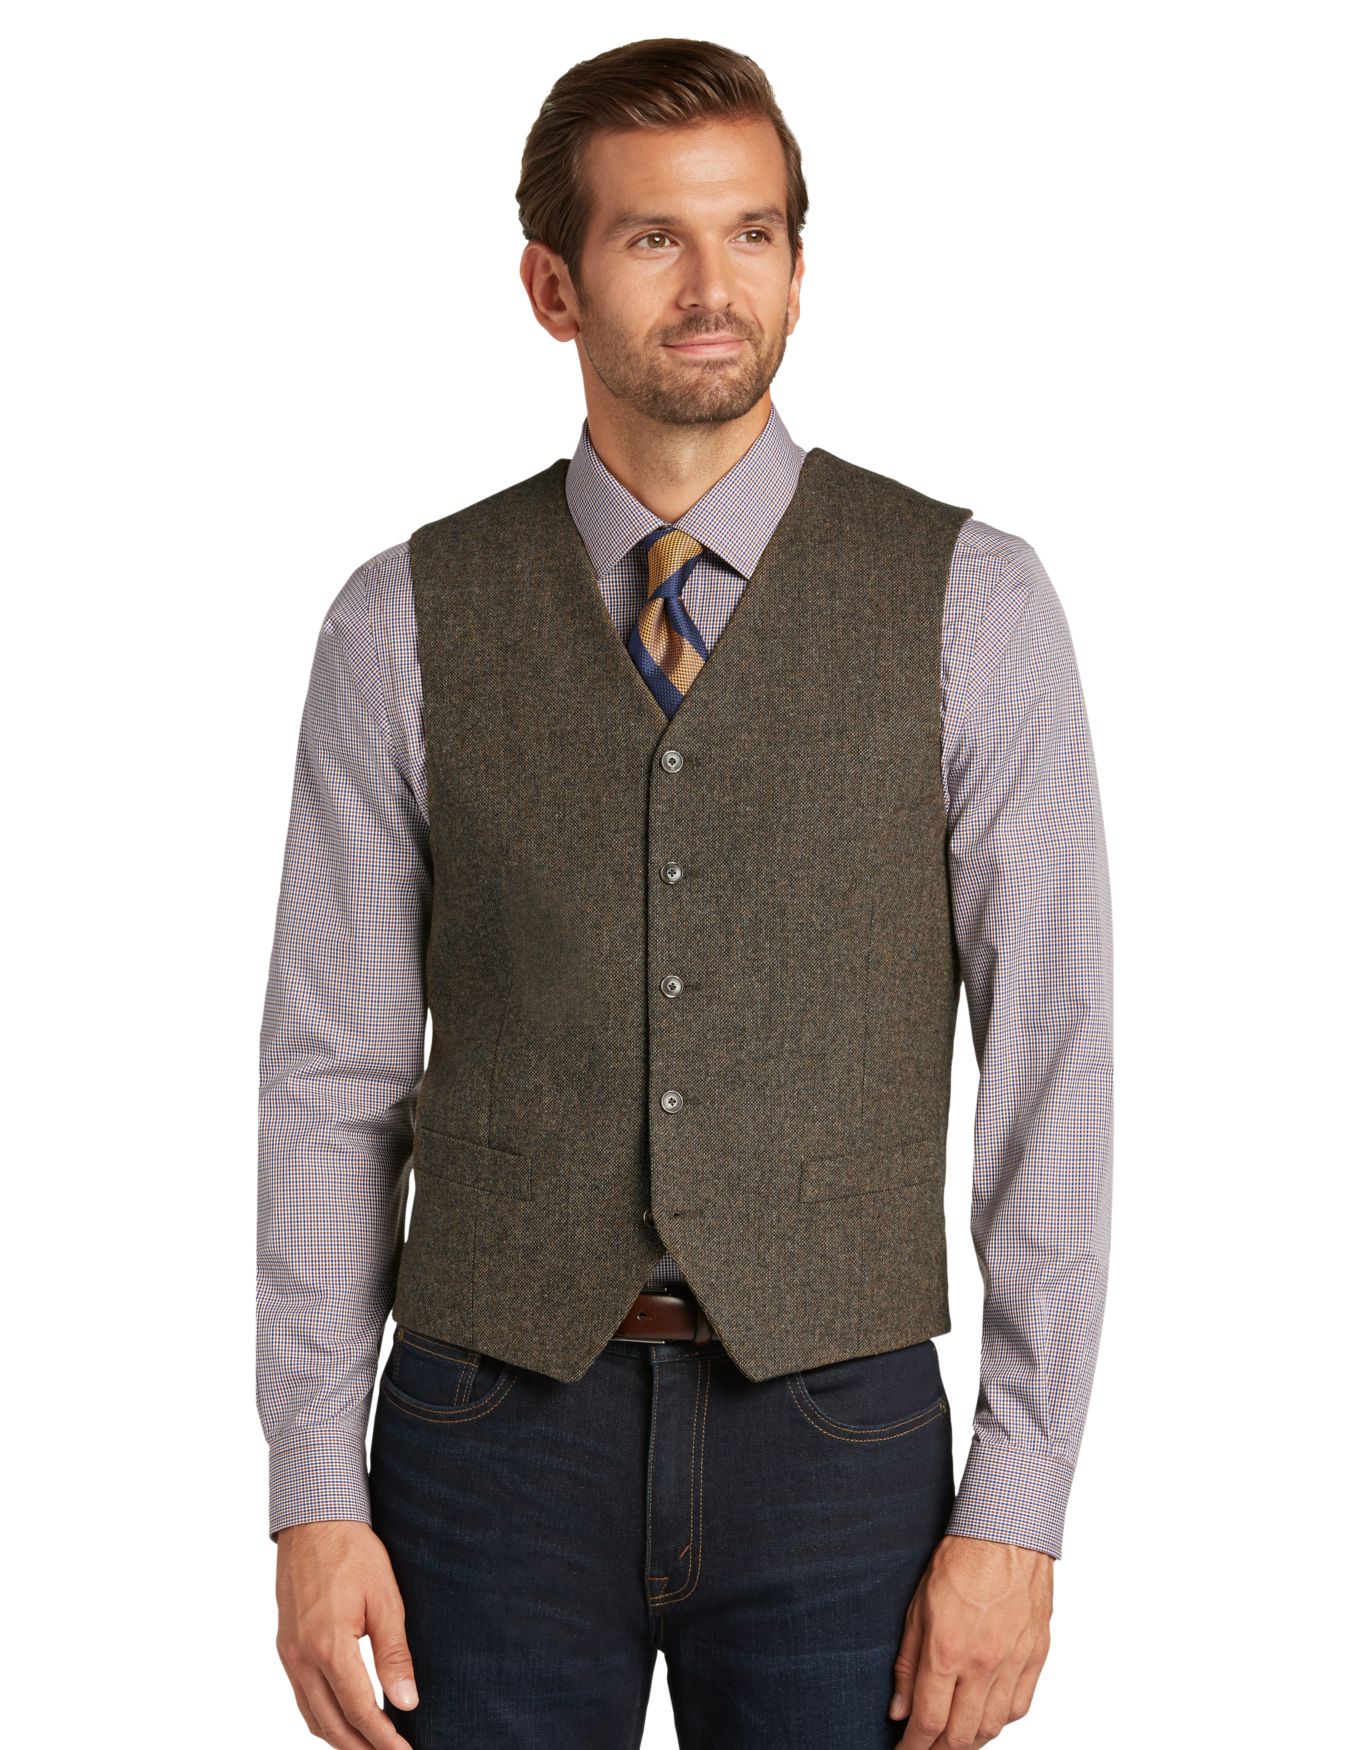 1905 Collection Tailored Fit Donegal Tweed Vest - Vests | Jos A Bank